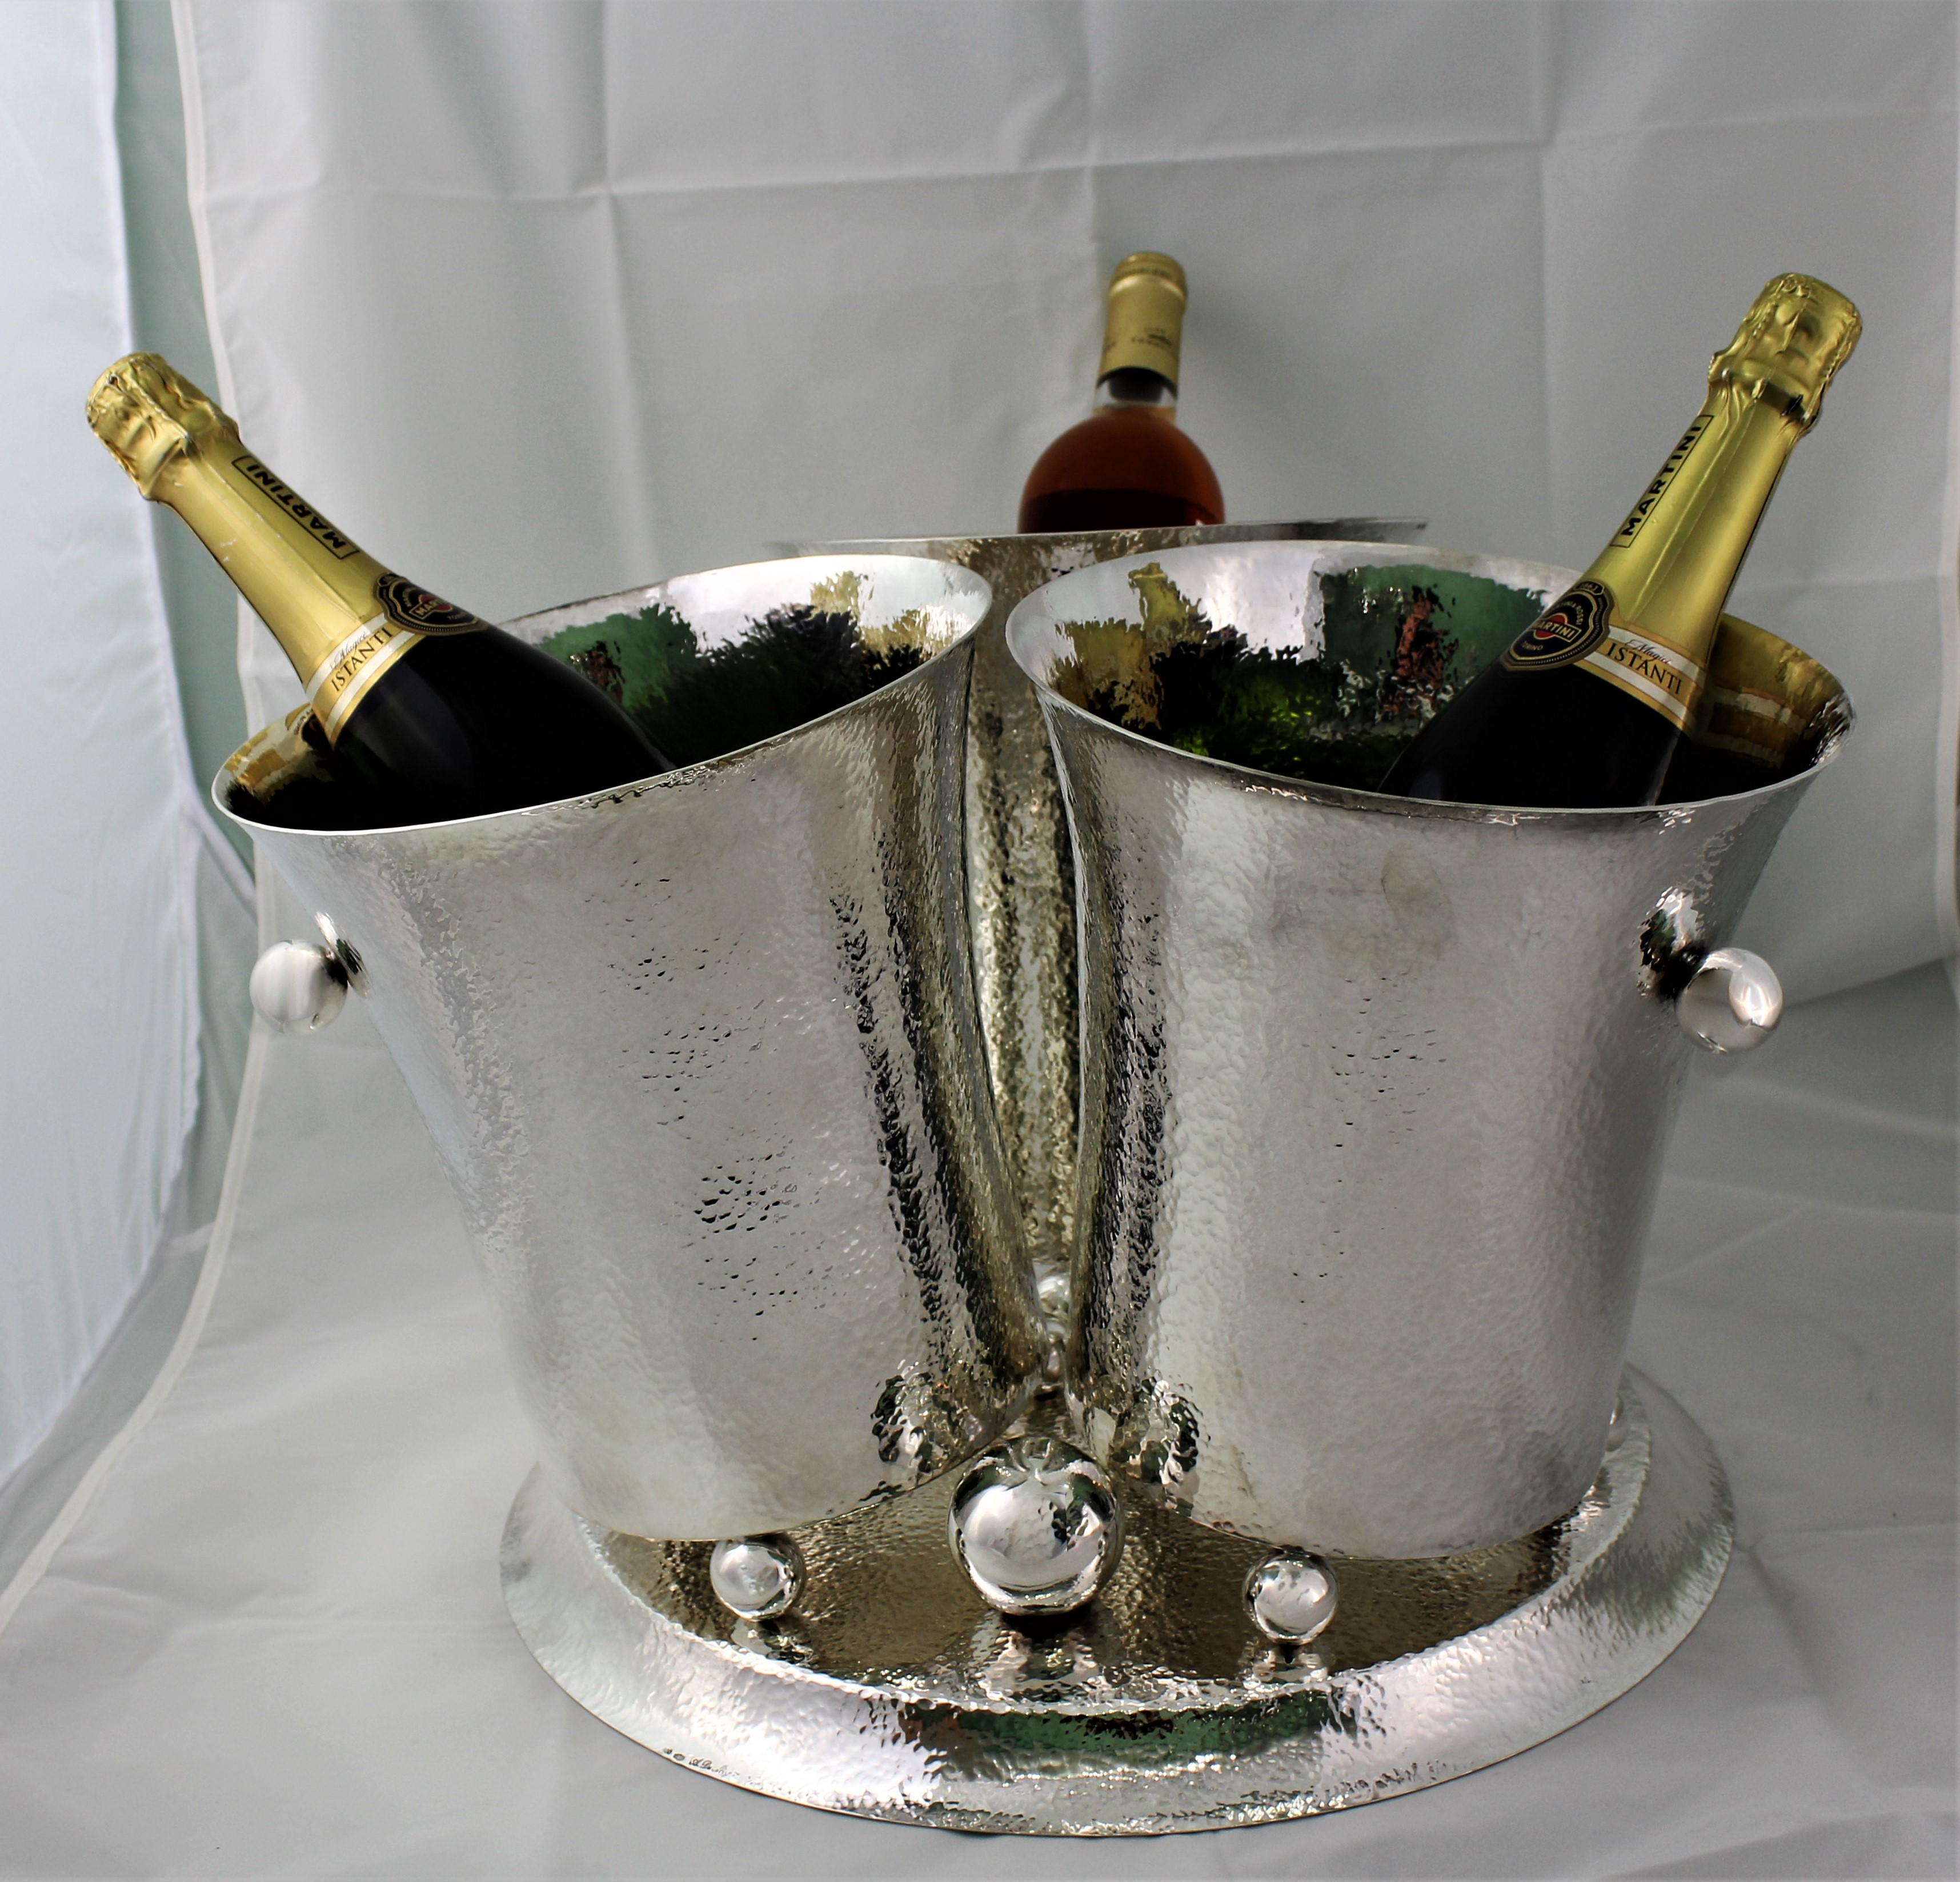 Wonderful Art Deco design hammered silver wine cooler. 

3 design hammered wine coolers with spheric handles laying on a circular hammered base. 

Realized between 1934 and 1944 by the silversmith Aldo De Mori from Bologna, Italy

Unique and